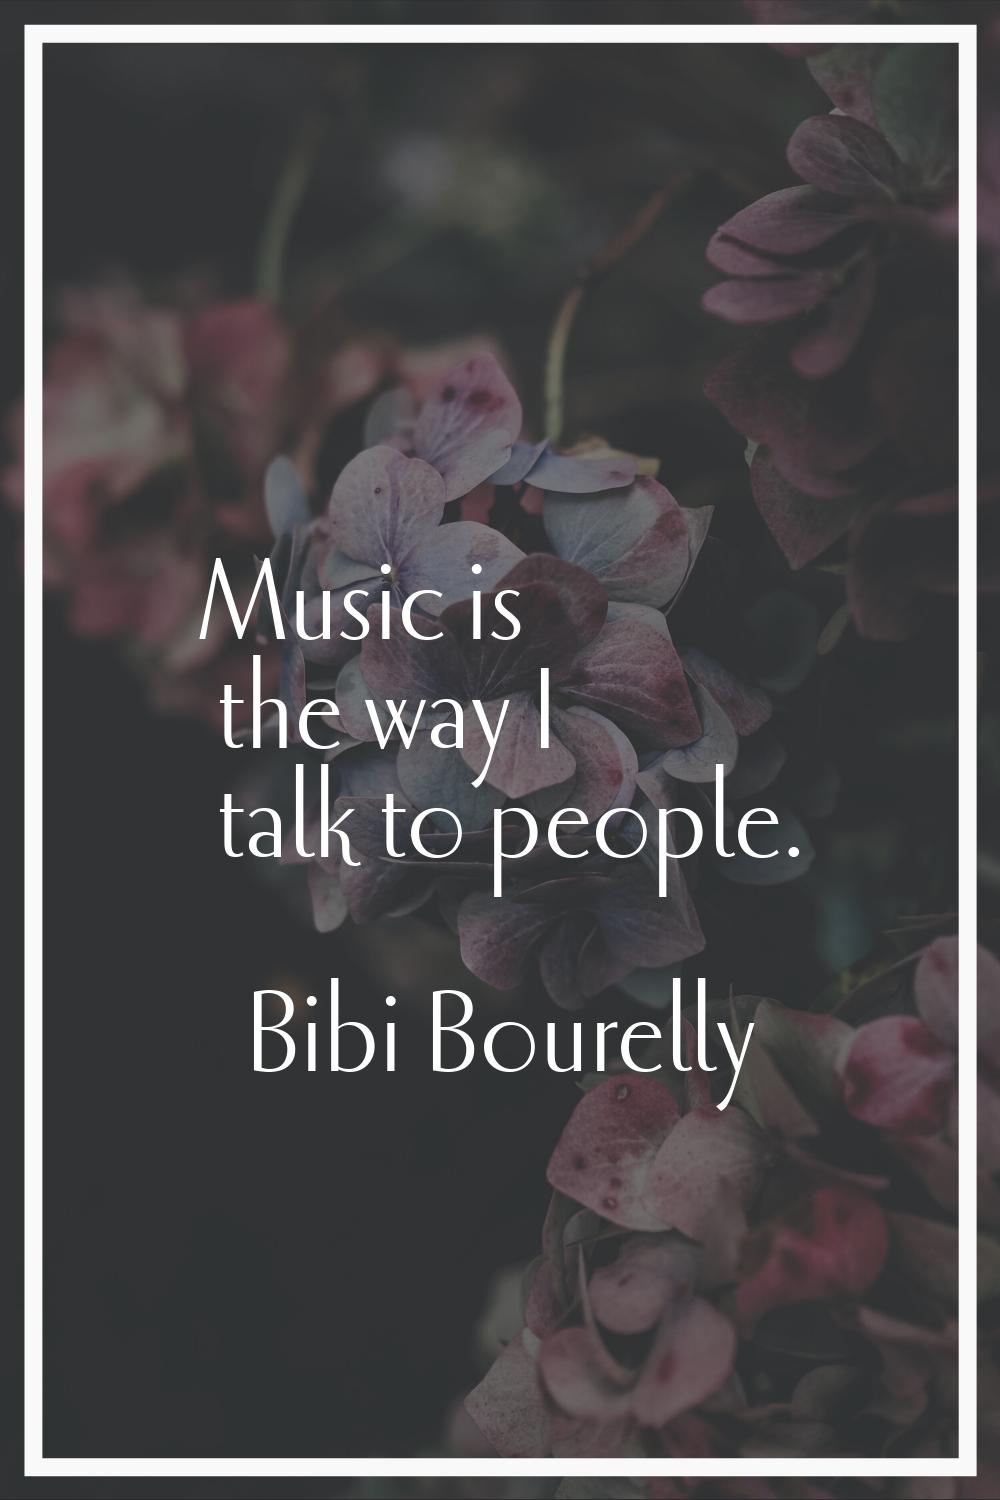 Music is the way I talk to people.